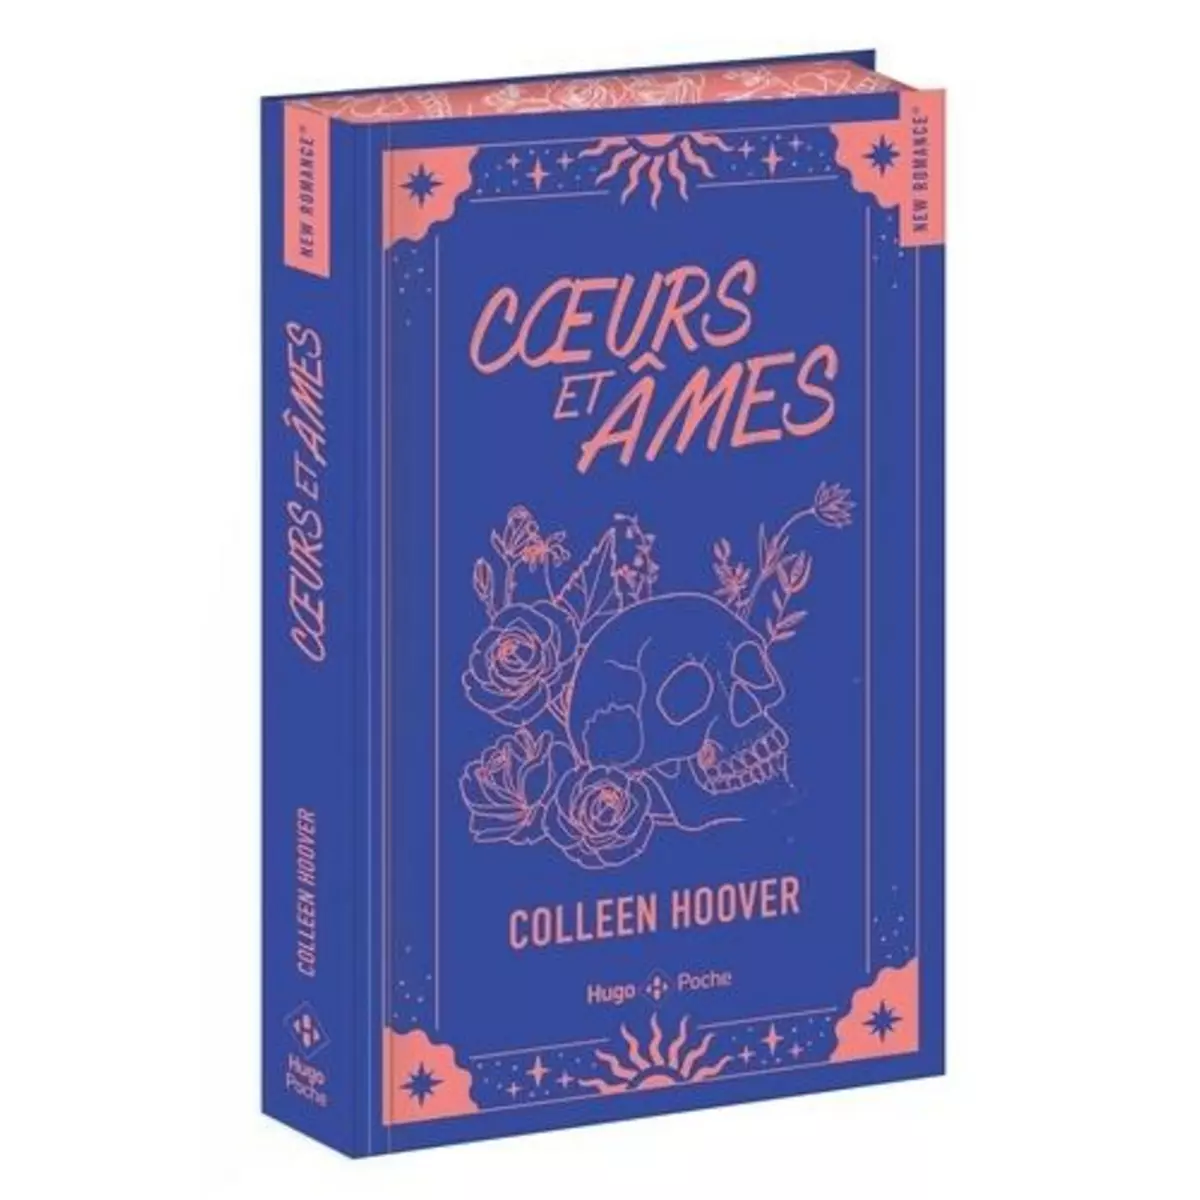  COEURS ET AMES. EDITION COLLECTOR, Hoover Colleen